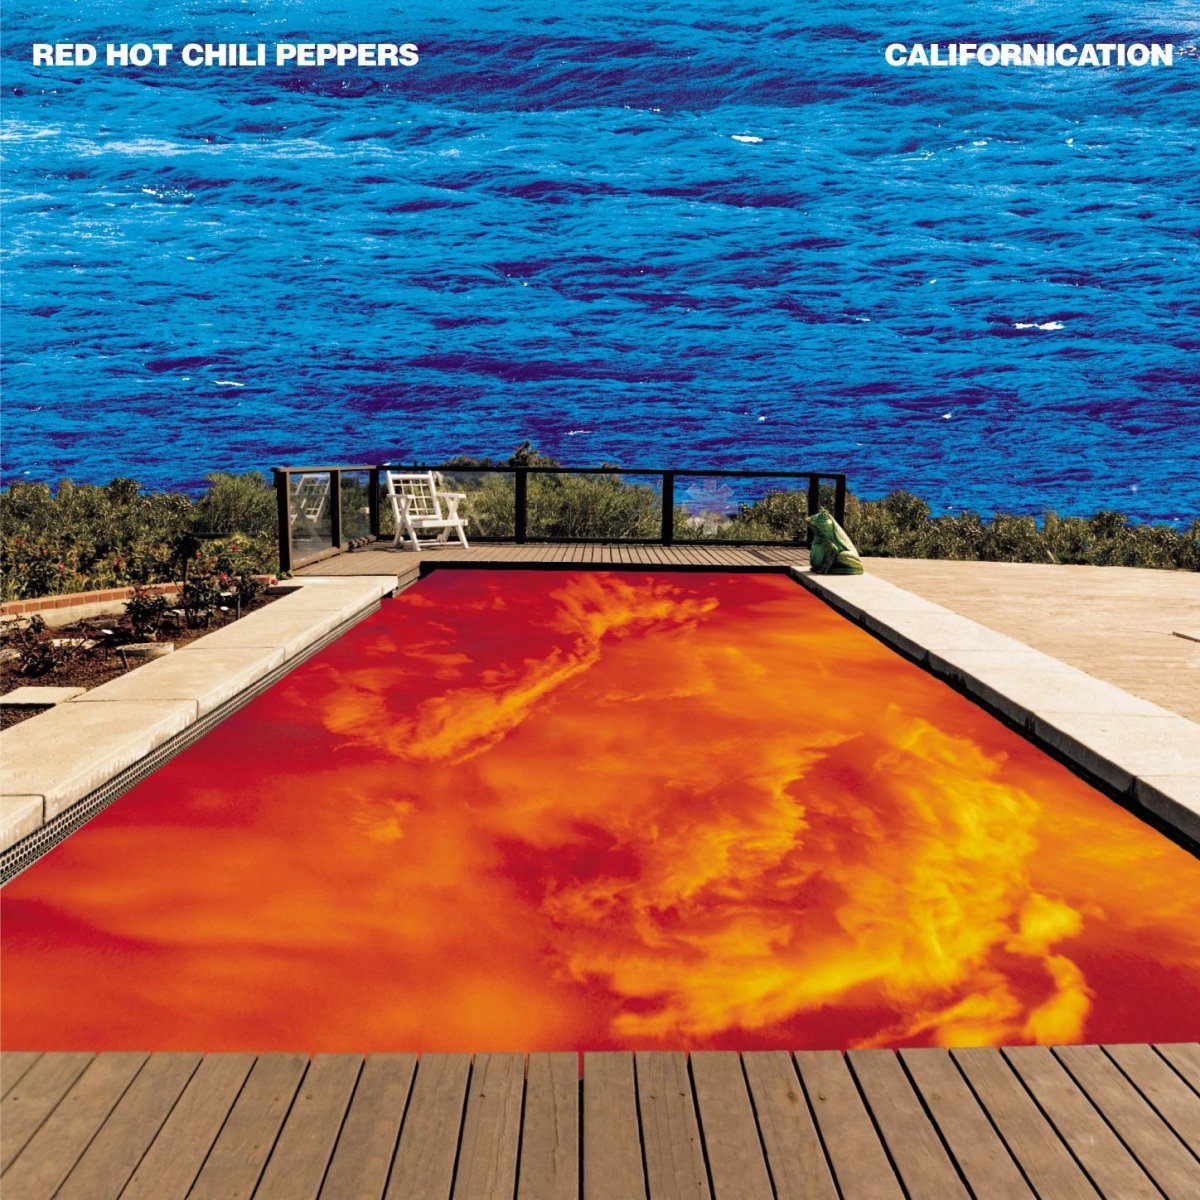 Scar tissue - Red Hot Chili Peppers